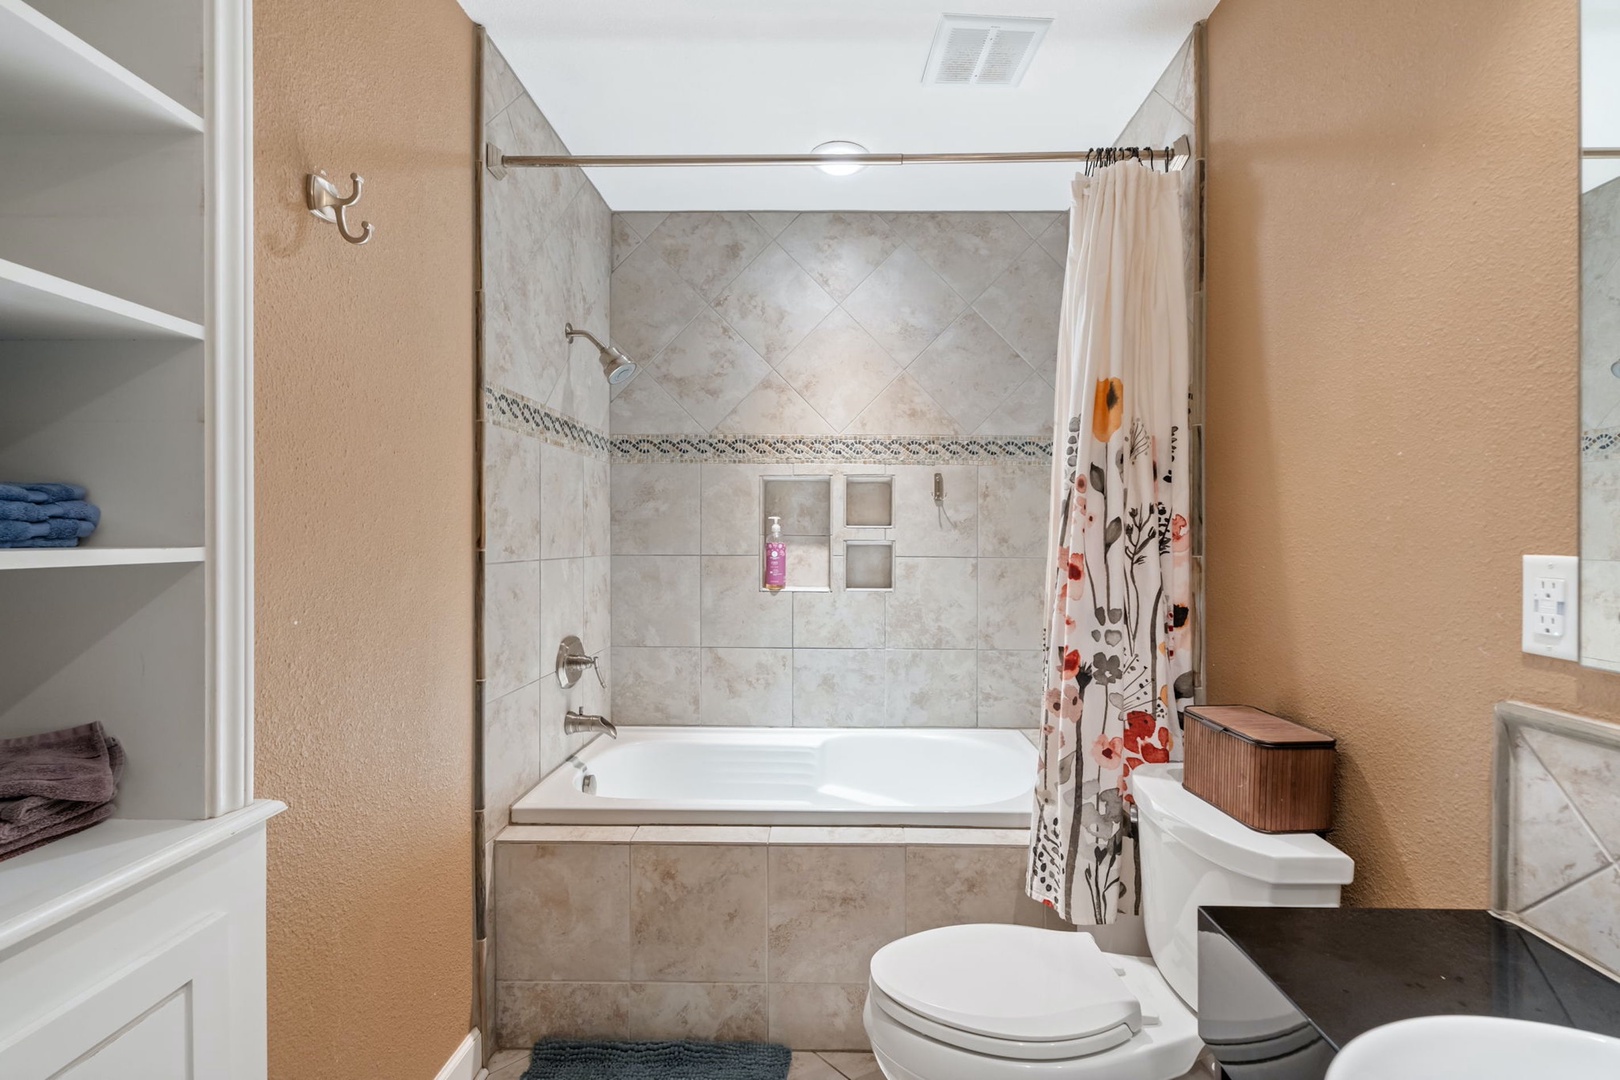 A chic dual vanity & shower/soaking tub combo await in the full bath